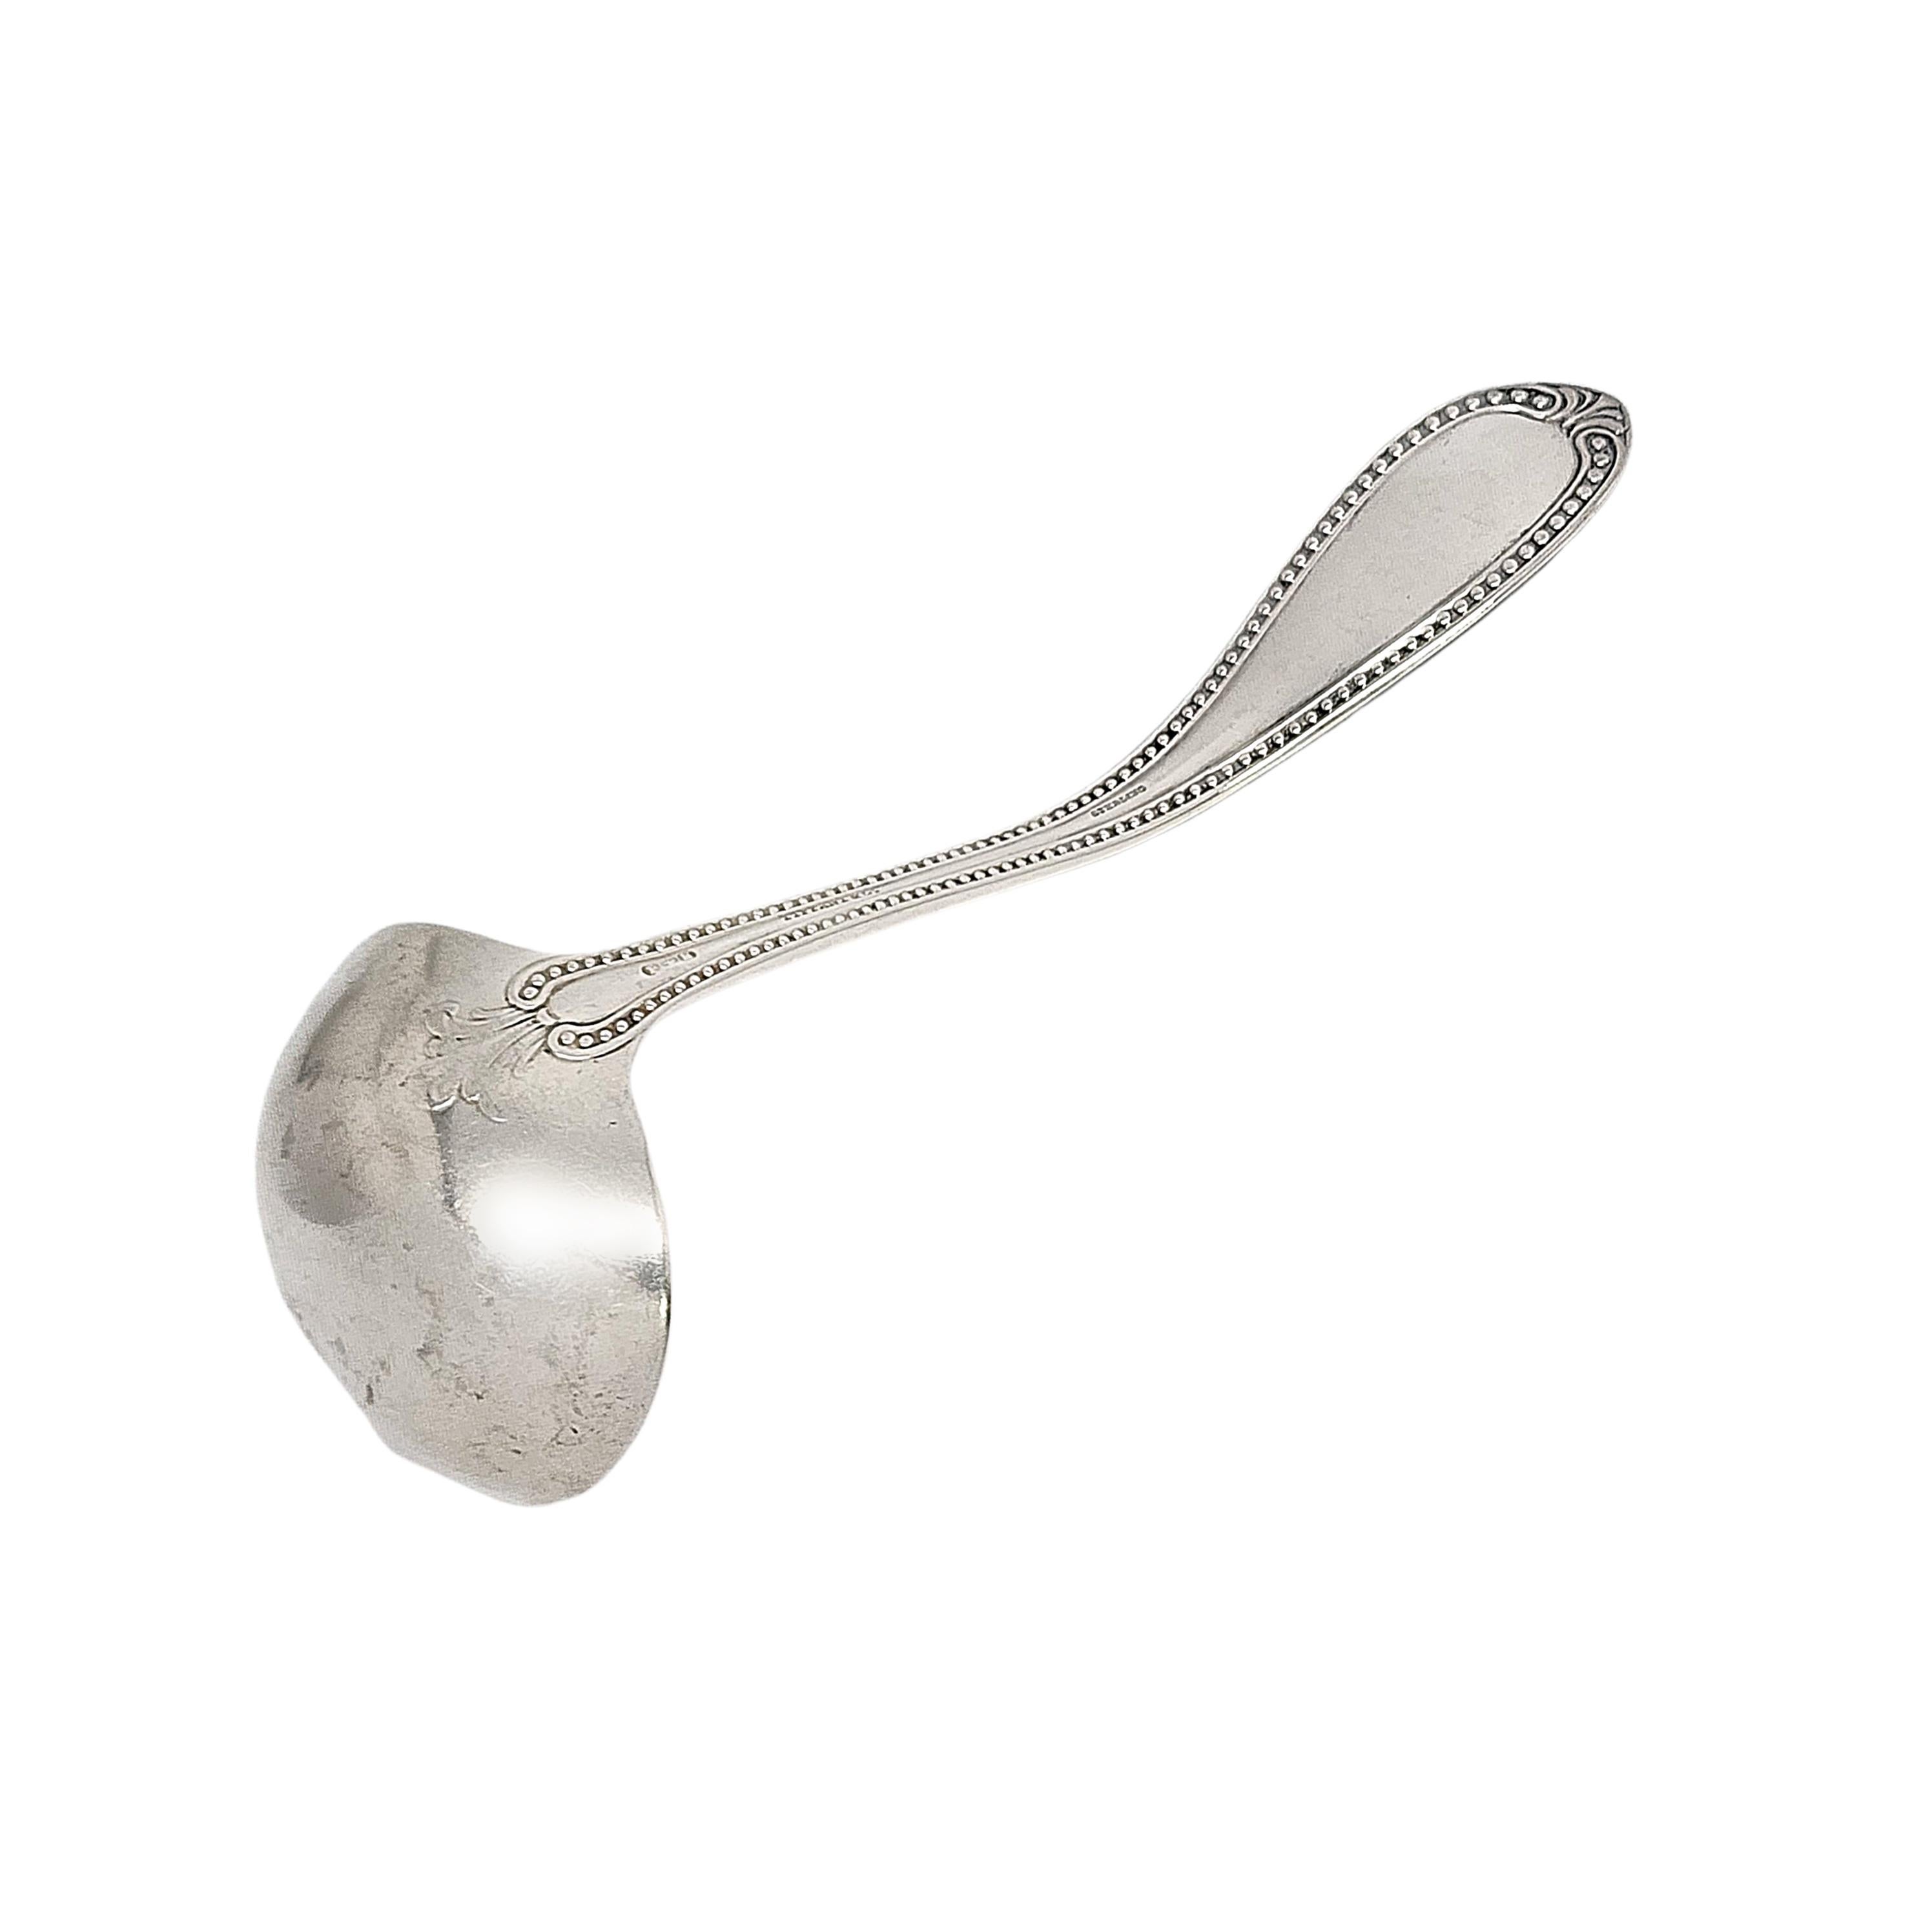 Sterling silver bead ladle with monogram by John Polhamus for Tiffany & Co.

Monogram appears to be MP

This small ladle features a beaded edge handle design. Does not include Tiffany & Co box or pouch.

Measures approx 6 3/4